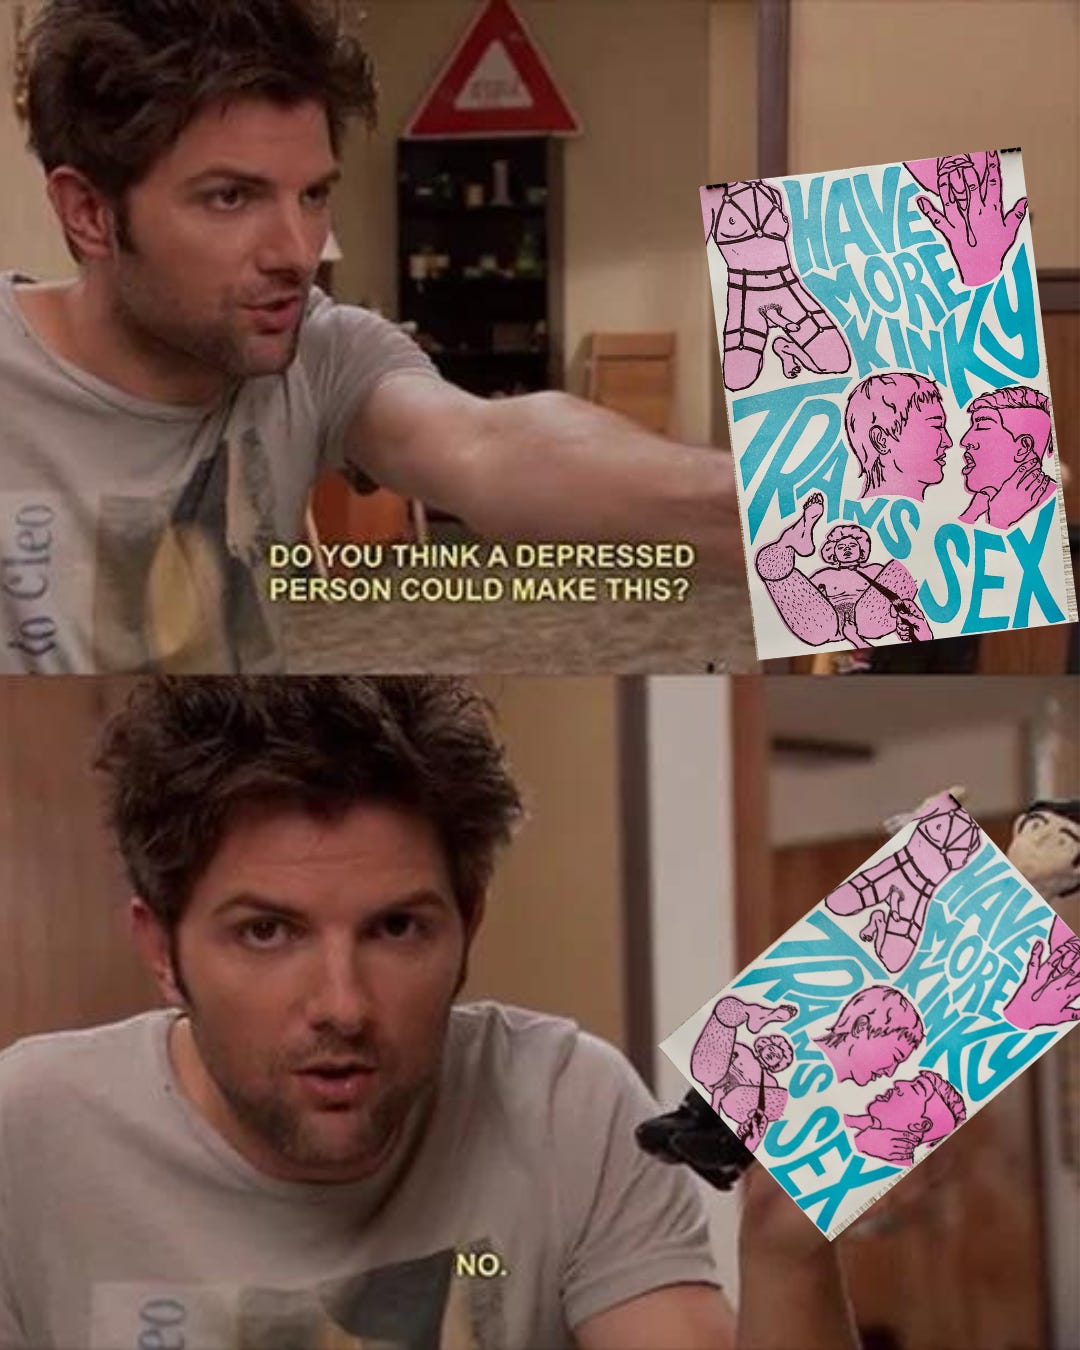 Ben, from Parks and Recreation, looking disheveled. In the first panel, he is holding out his arm, where the "Have More Kinky Trans Sex" poster is superimposed. The caption says "Do you think a depressed person could make this?" In the second panel, he's looking at the camera. The caption reads "No."